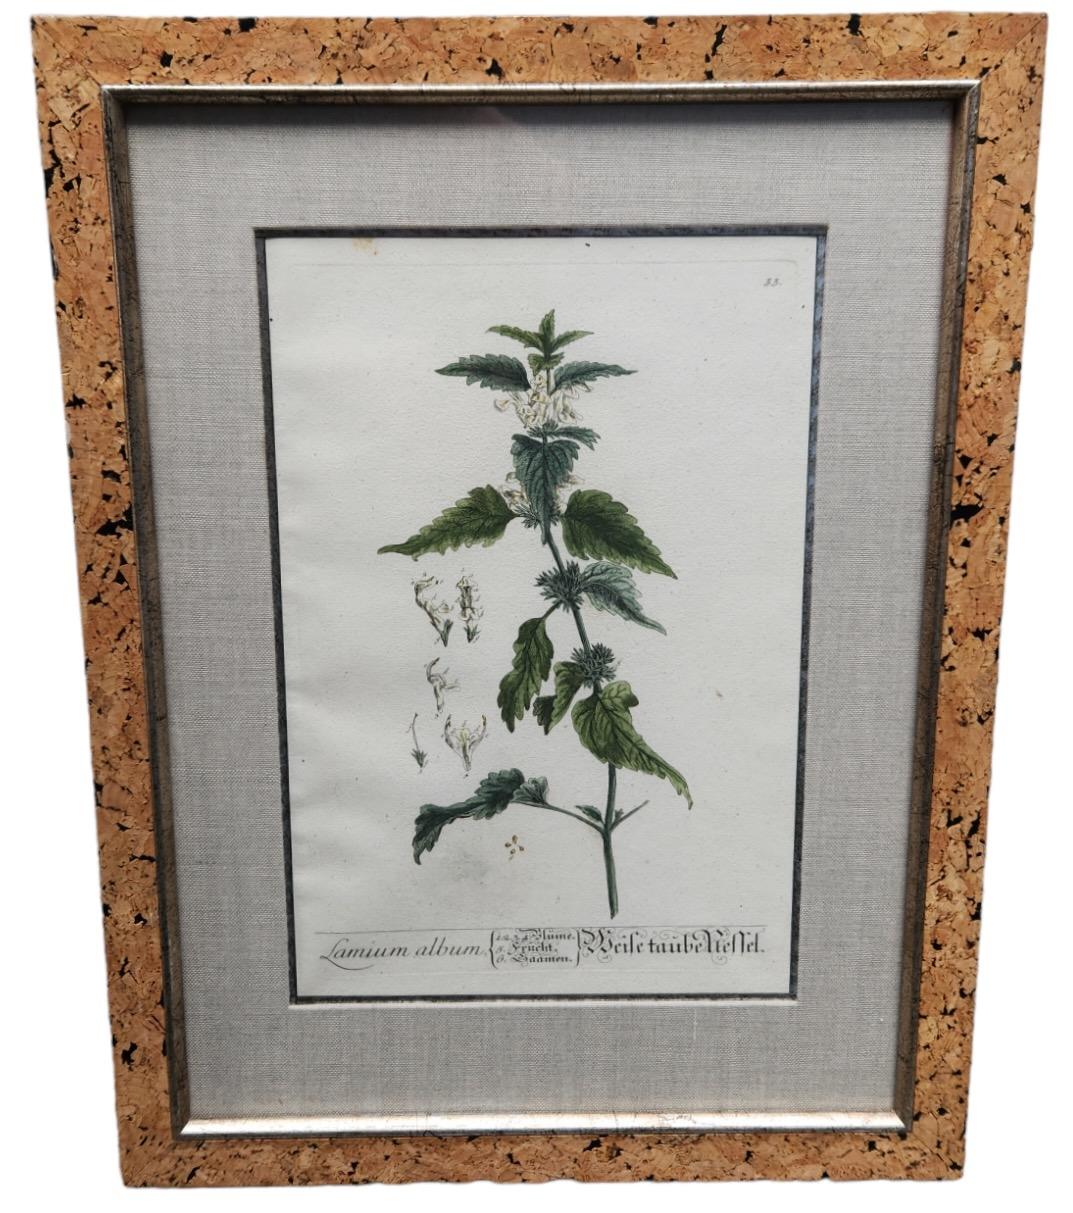 Copper 18th Century Elizabeth Blackwell Hand Tinted Botanicals - 12 Available For Sale